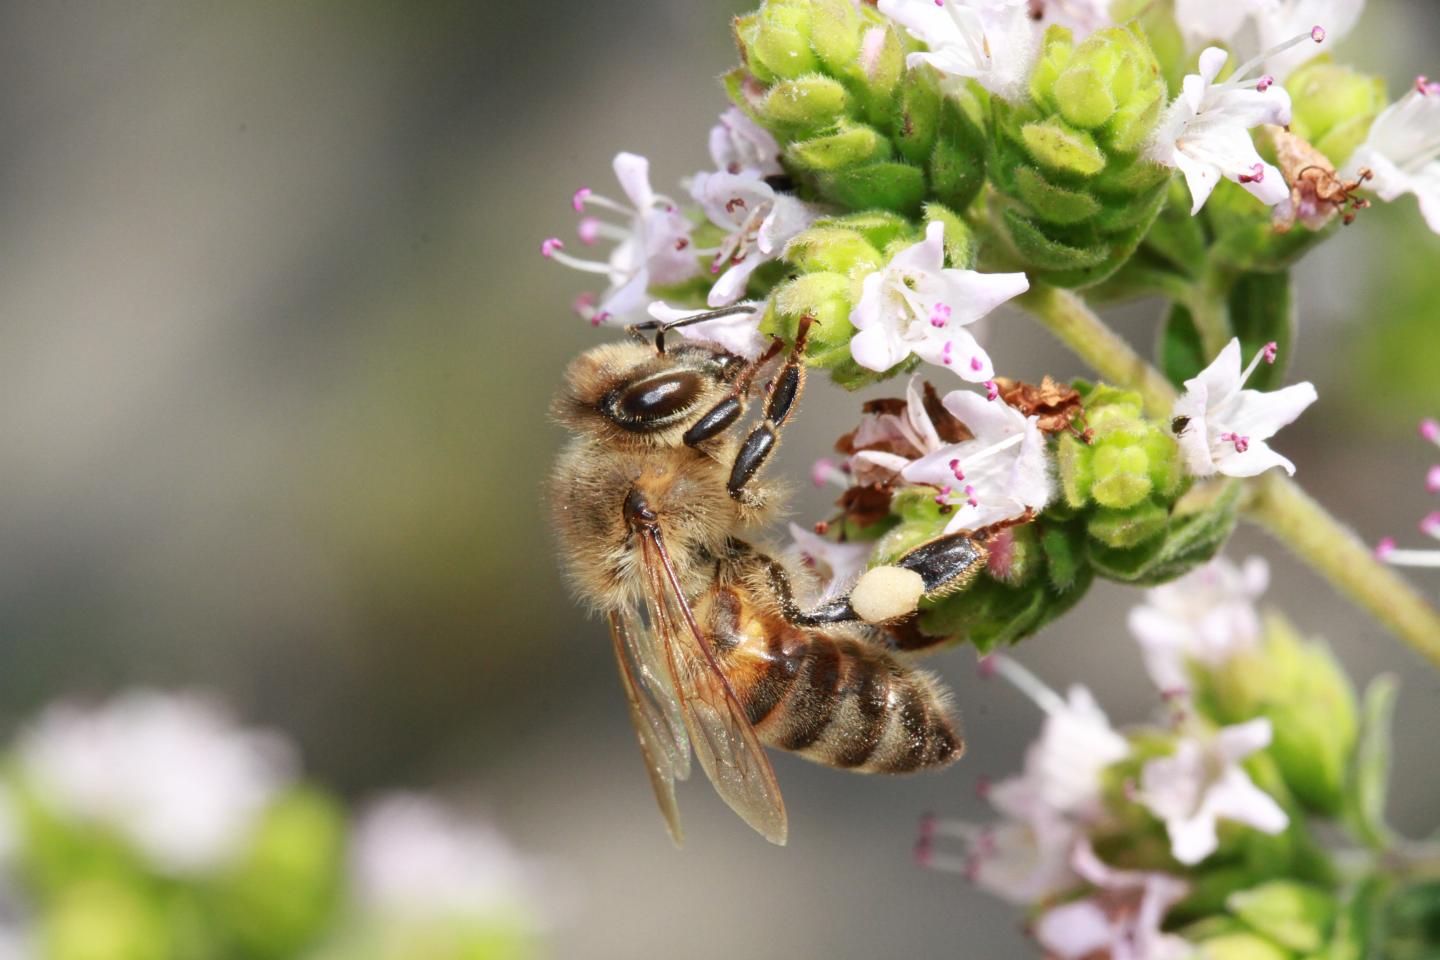 Evaluating competition for forage plants between honey bees and wild bees in Denmark